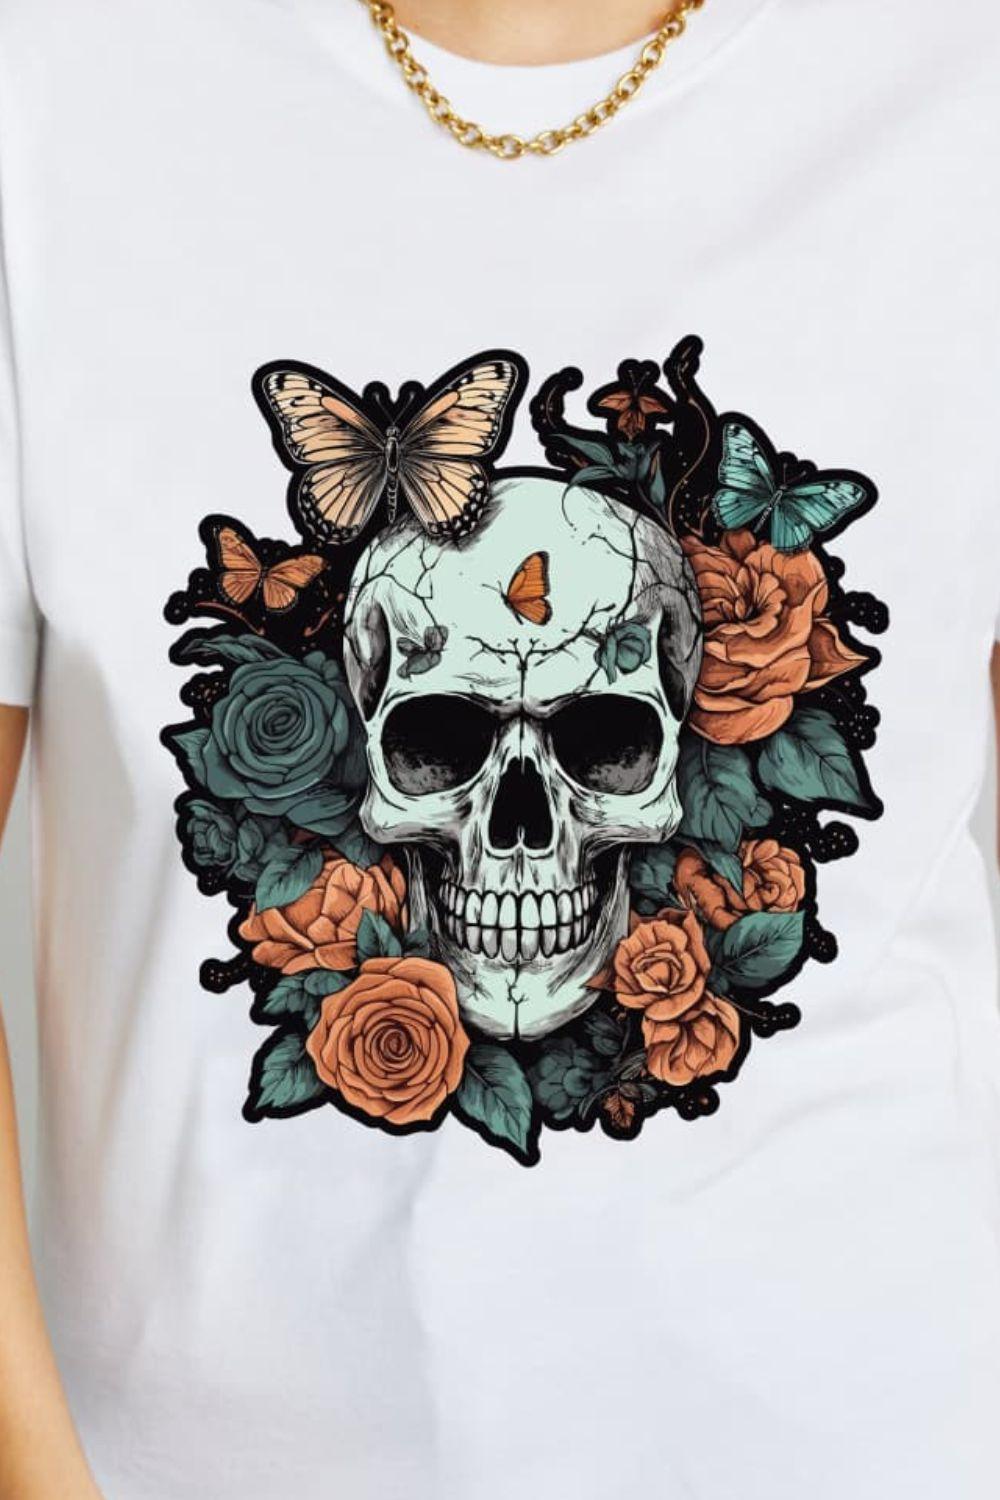 Simply Love Simply Love Full Size Skull Graphic Cotton T-Shirt - Lab Fashion, Home & Health